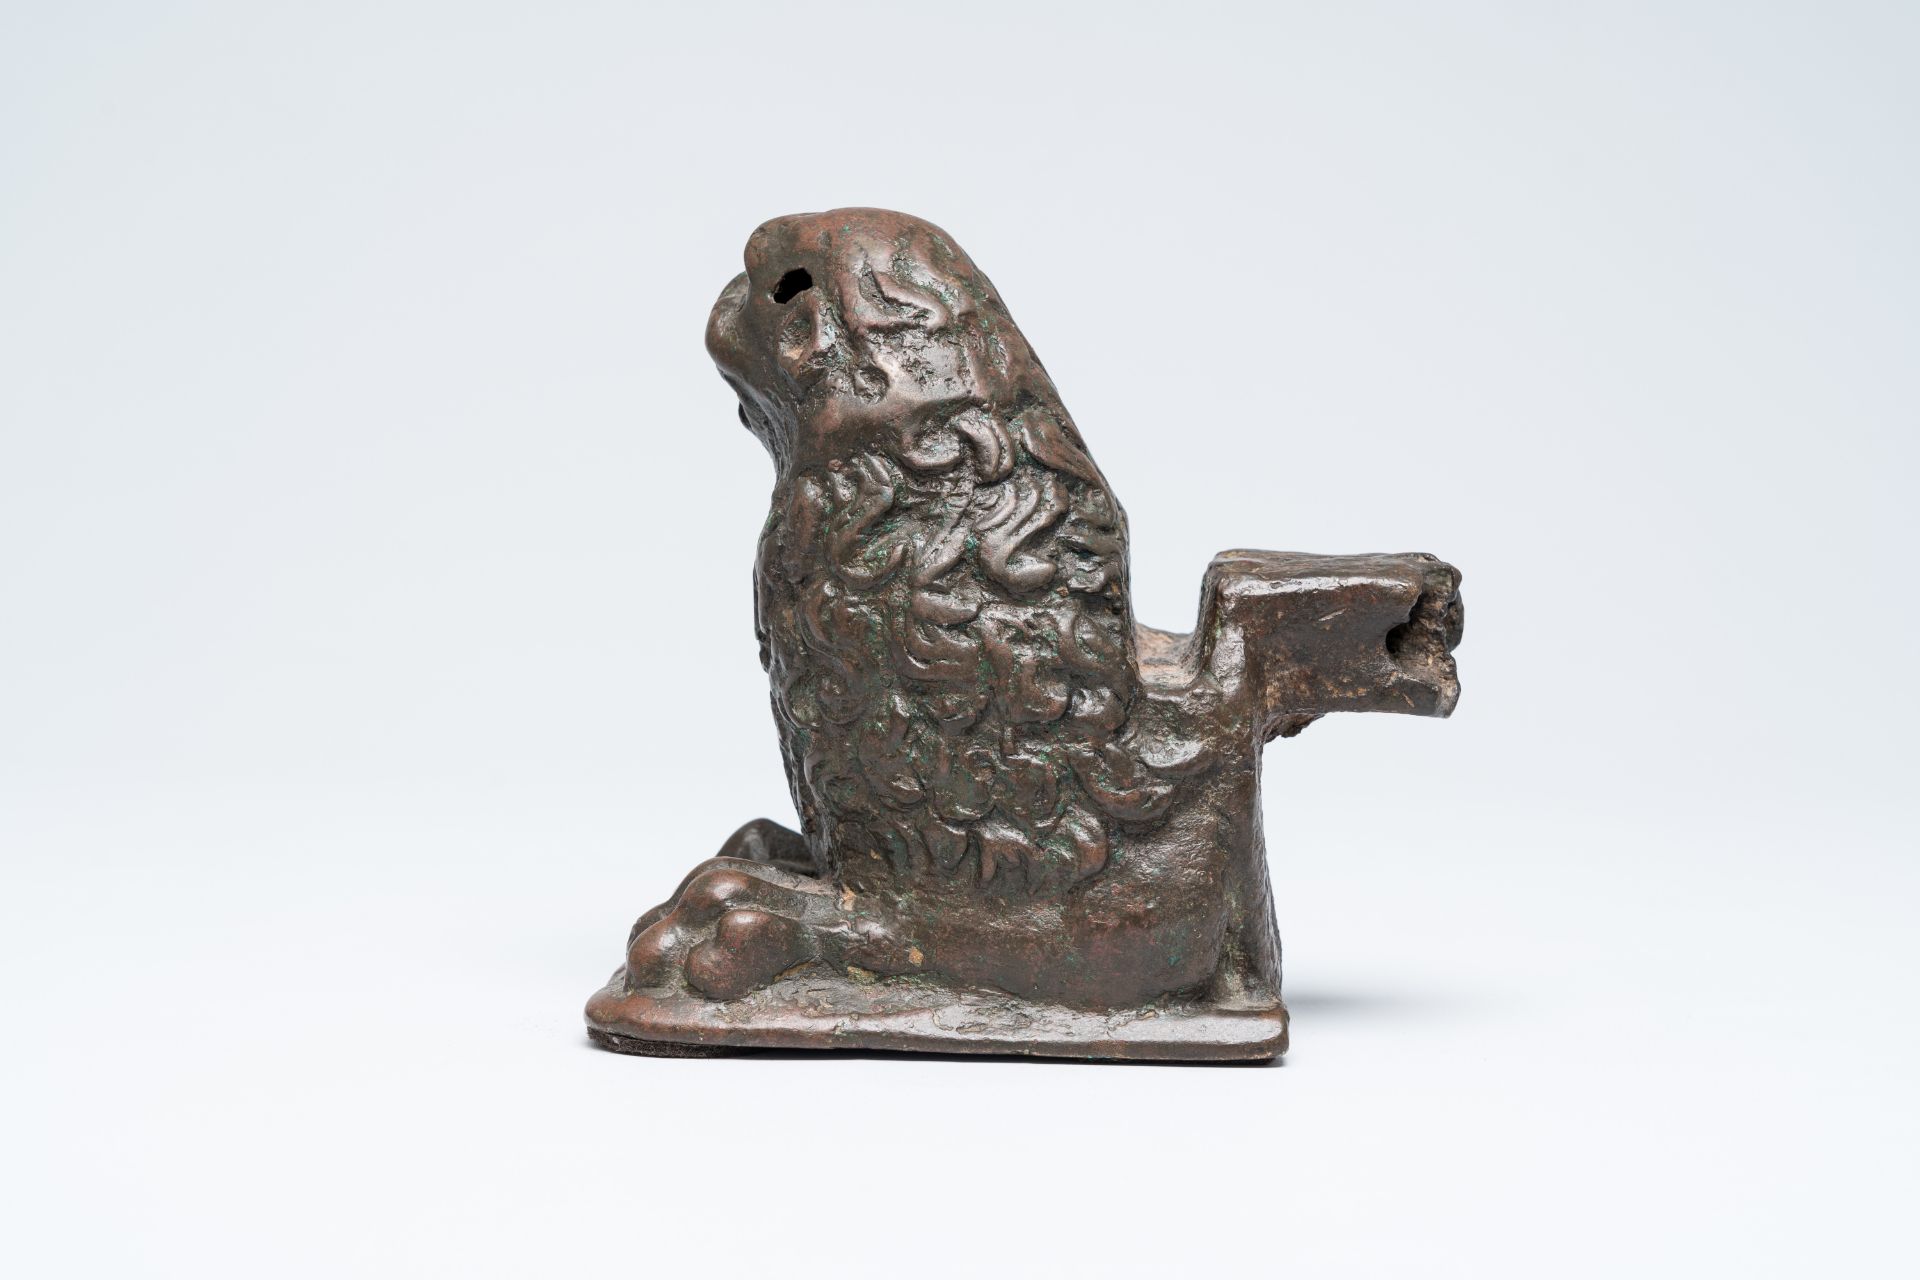 A North Italian Romanesque patinated bronze model of a lion, 13th C. - Image 4 of 7